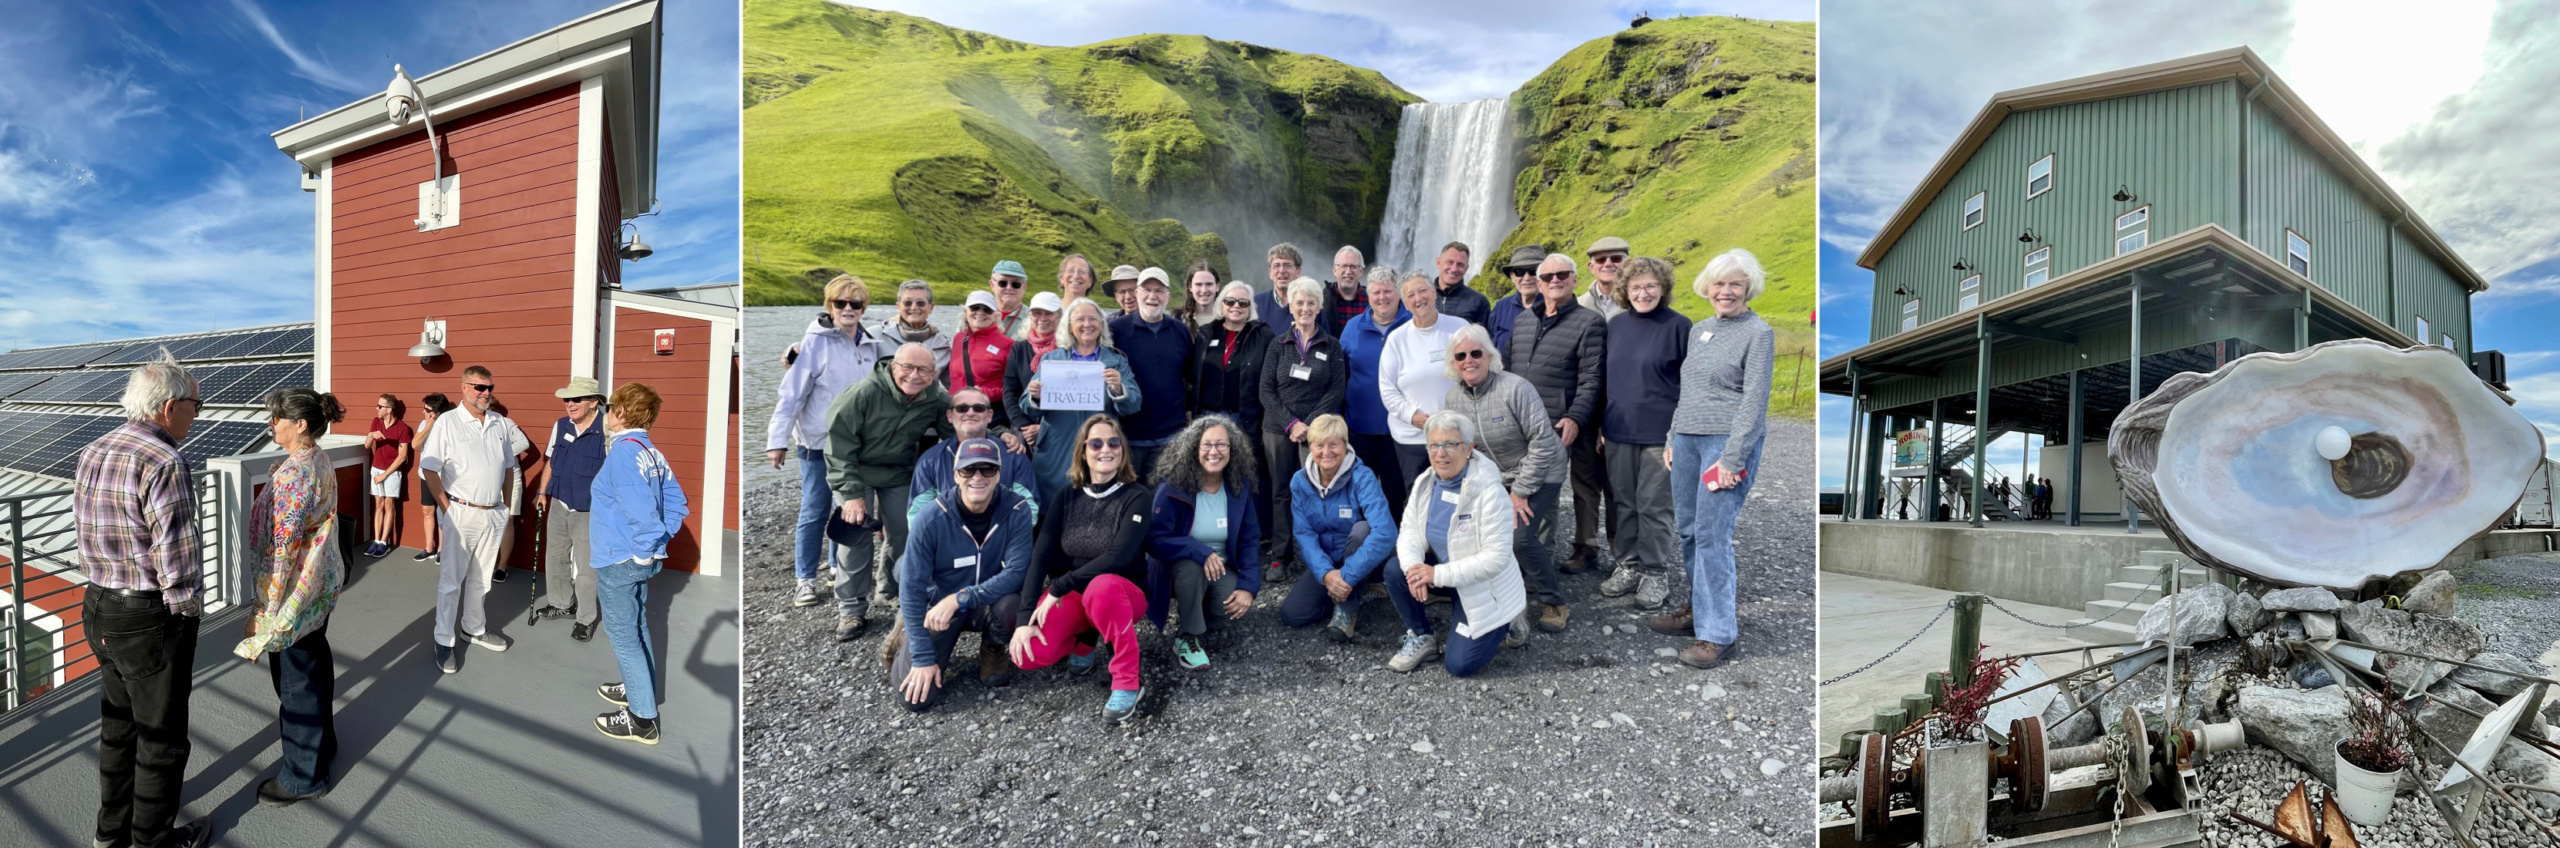 Chautauquans on trips to Iceland and New Orleans